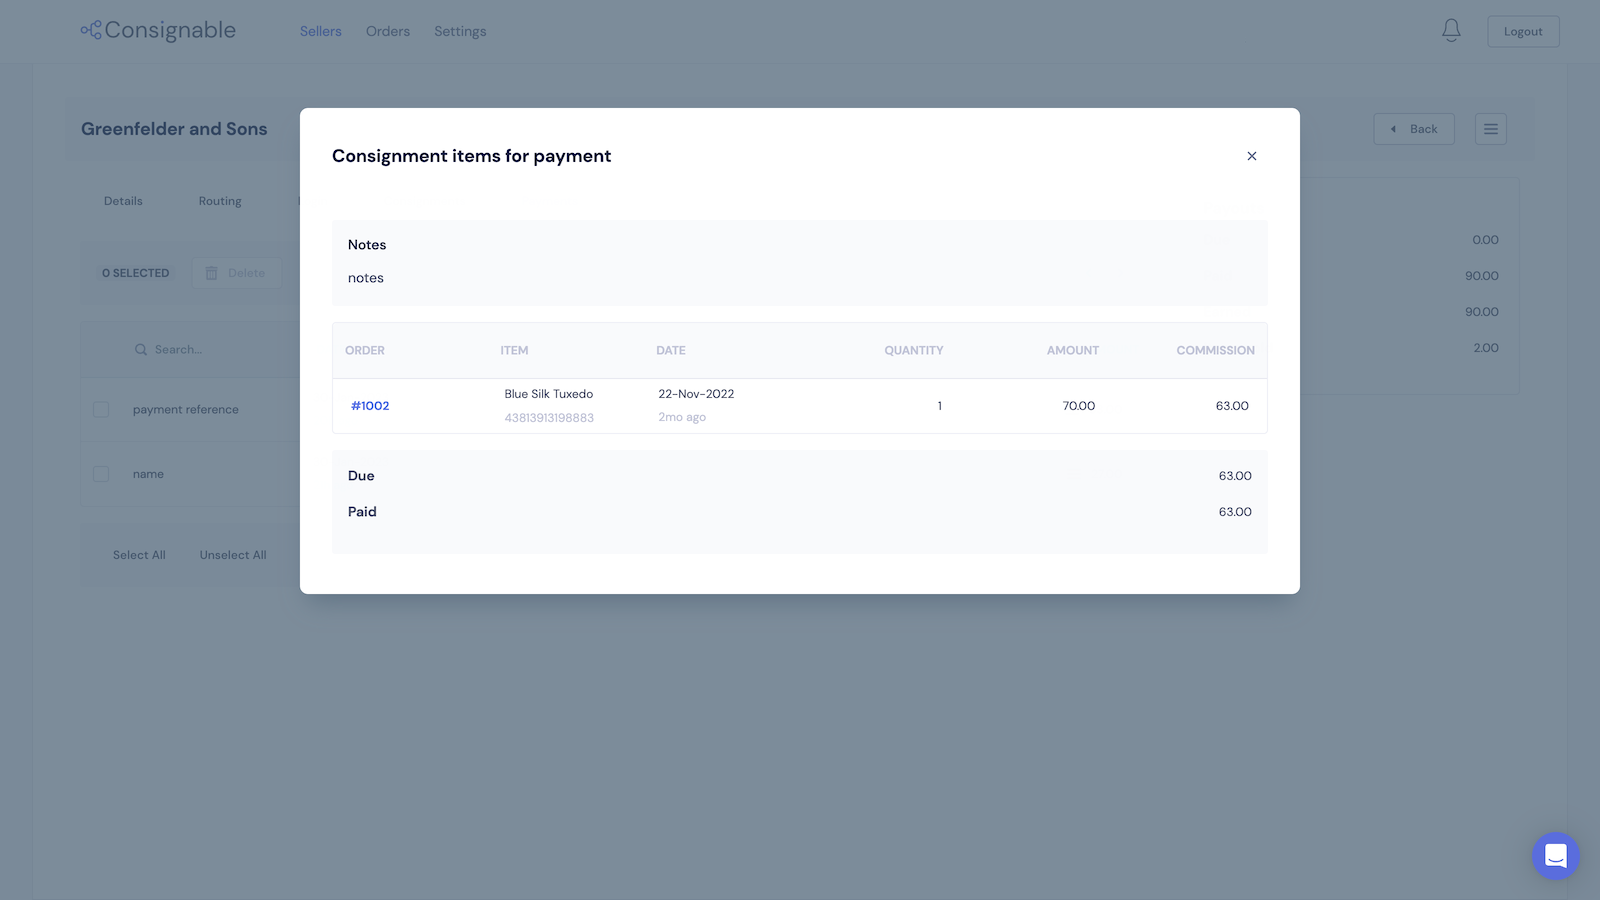 manage payments